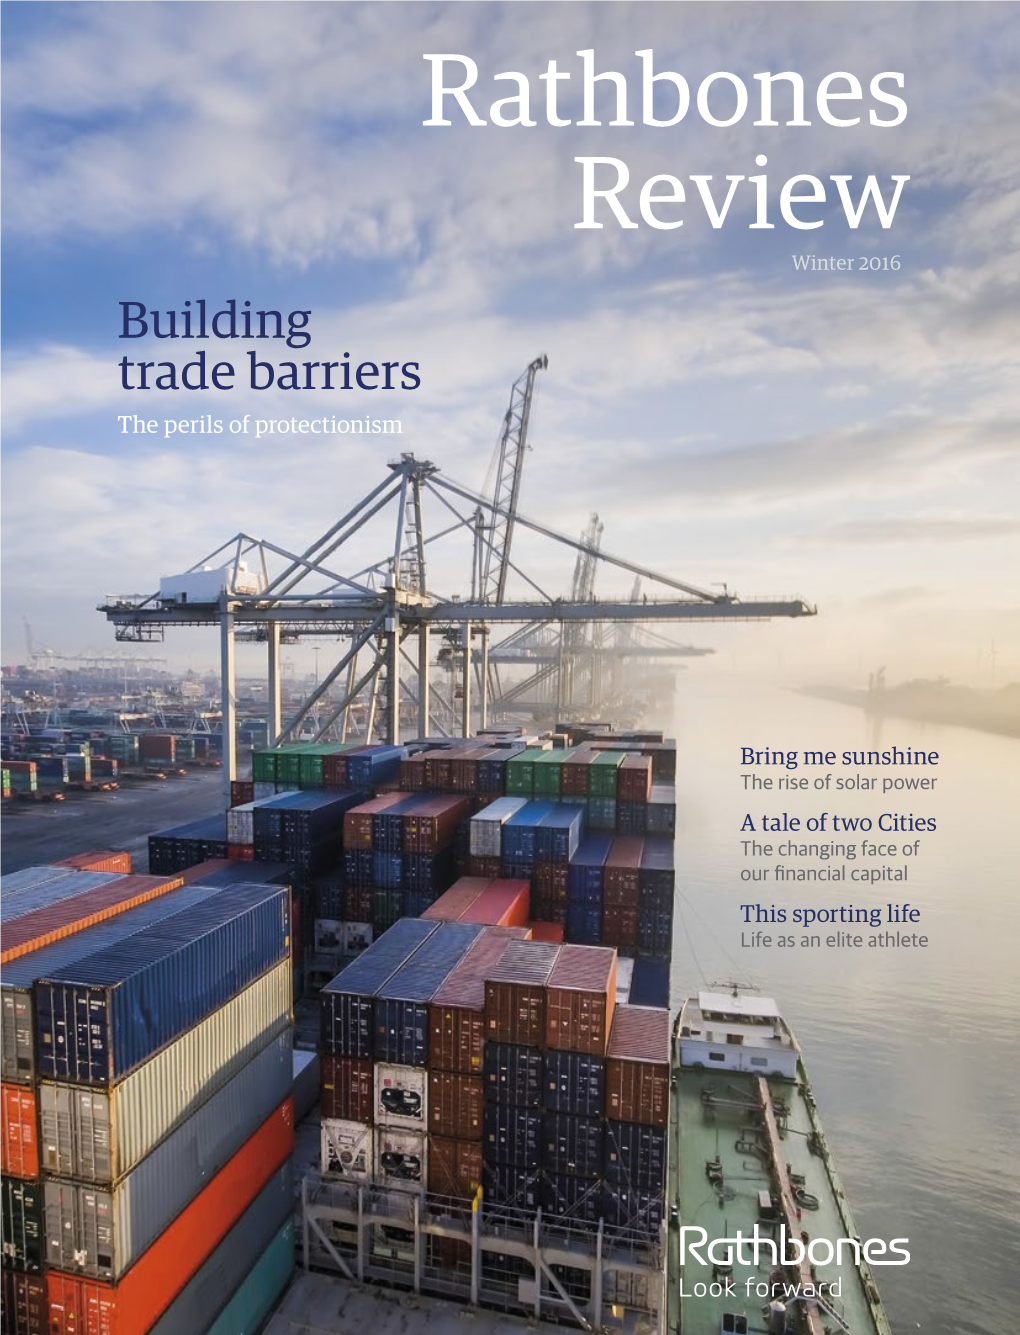 Rathbones Review Winter 2016 Building Trade Barriers the Perils of Protectionism